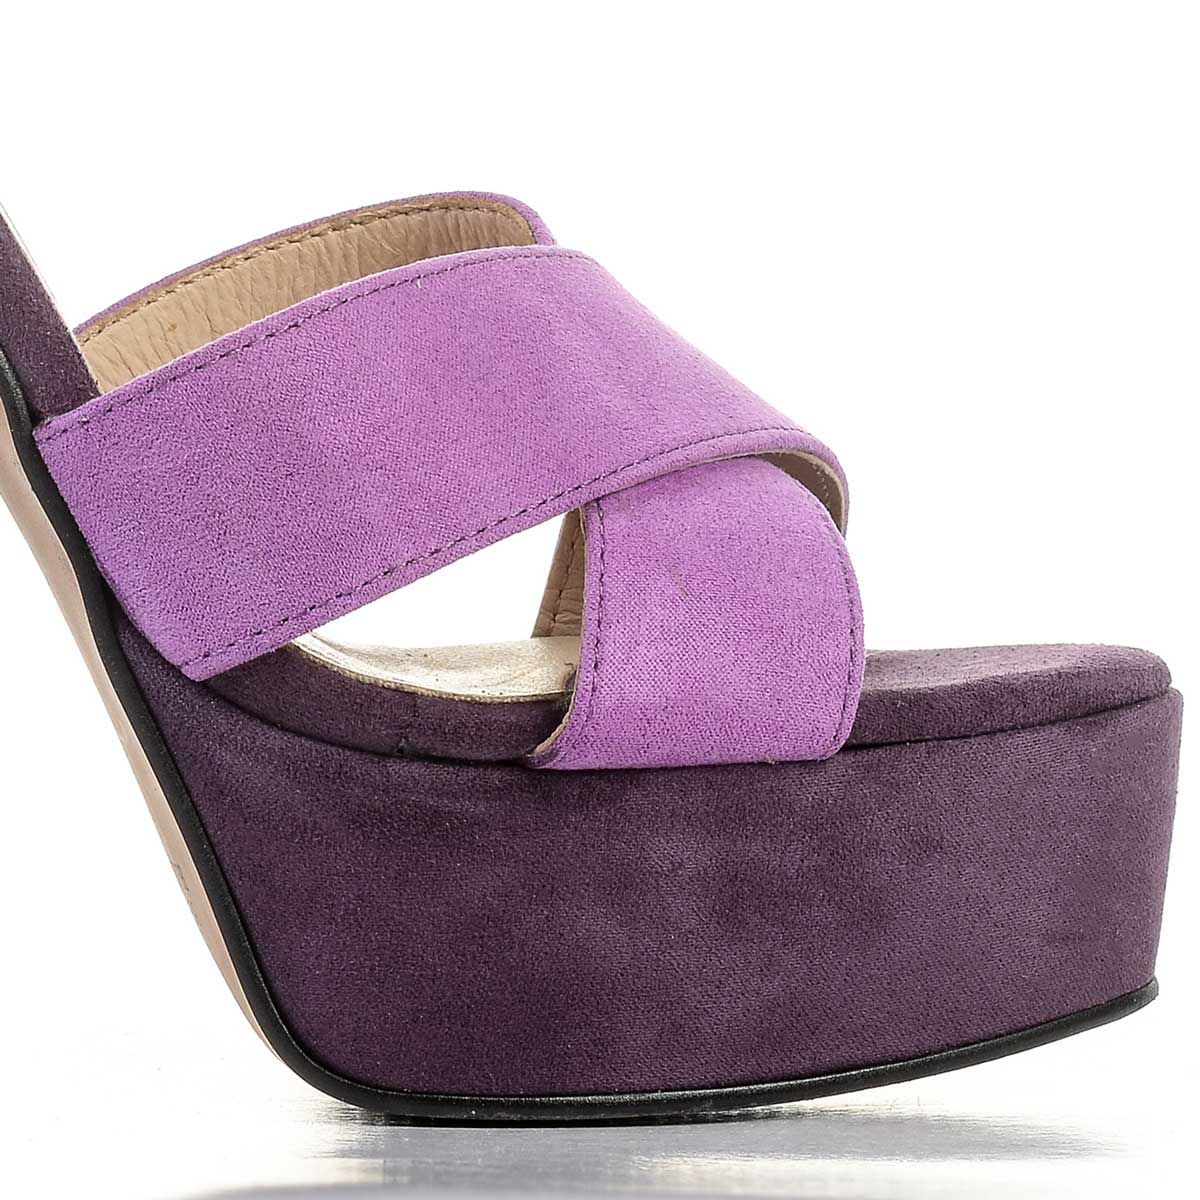 Sandal in leather against purple. Gel template. Heel 12 cm and platform 2 cm. Approx.